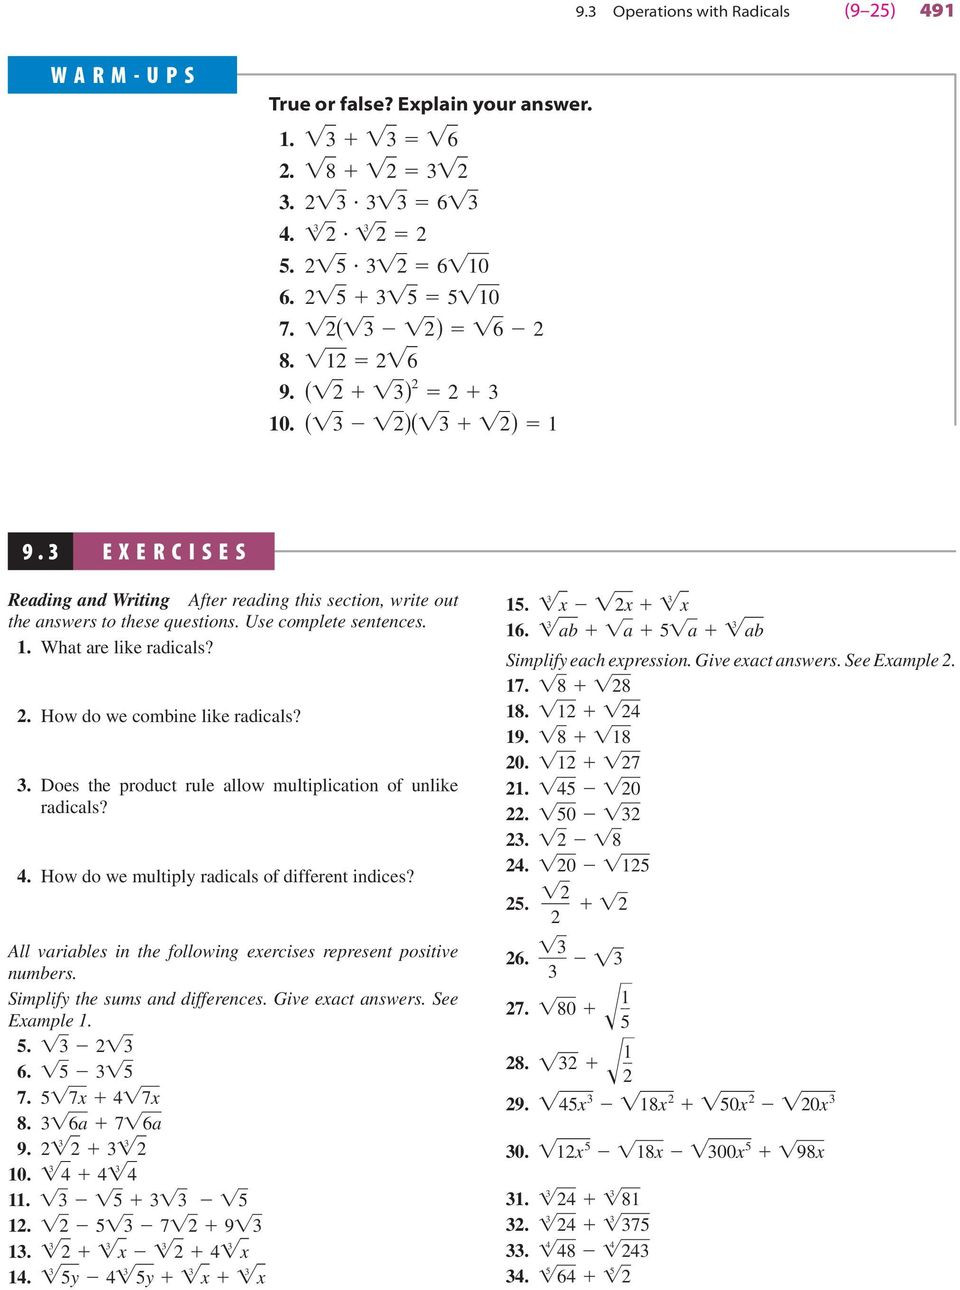 Multiply Radical Expressions Worksheet 9 3 Operations with Radicals Pdf Free Download